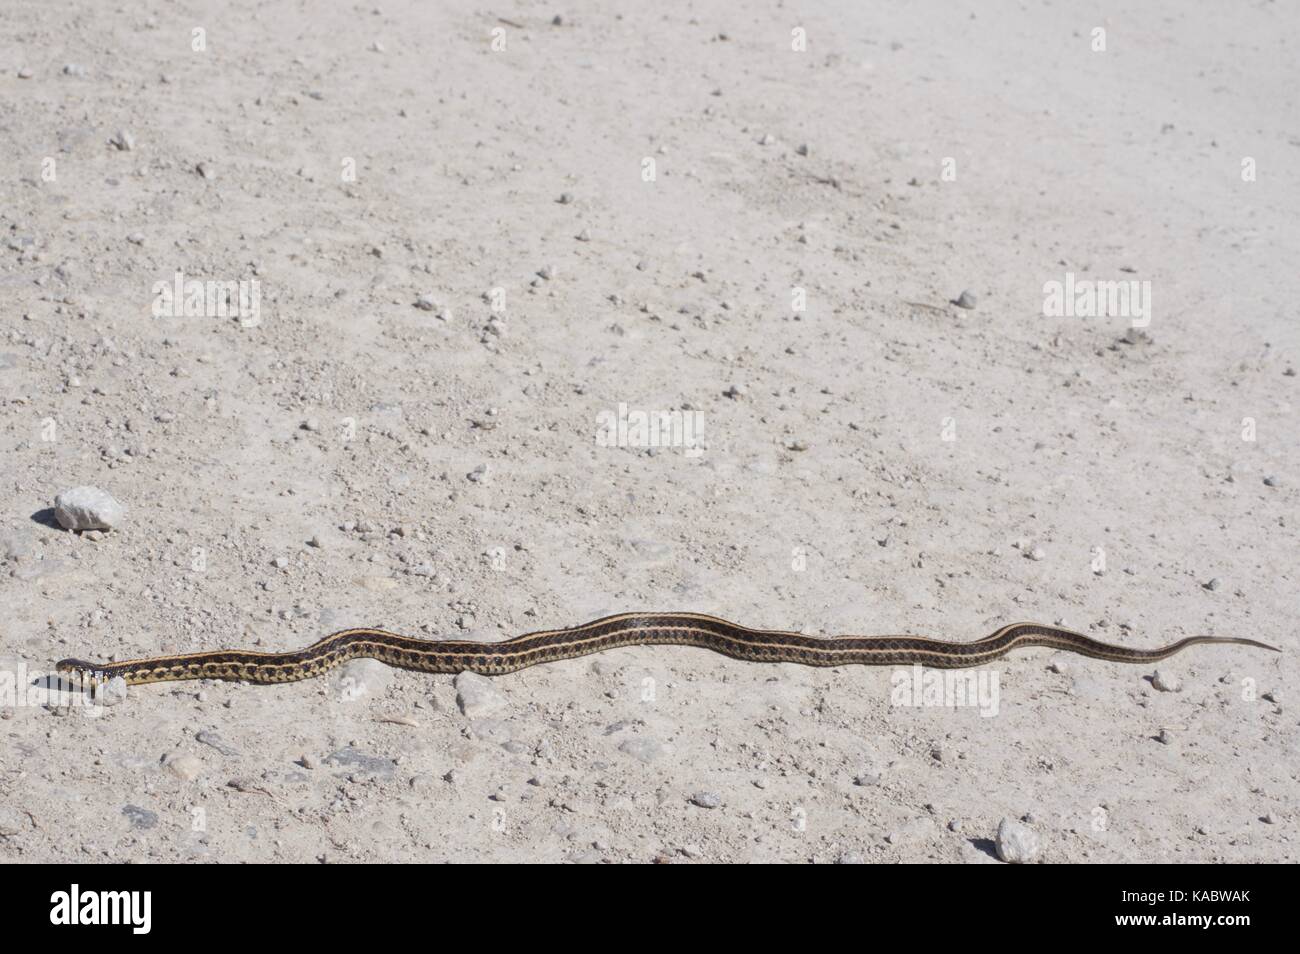 A Plains Gartersnake (Thamnophis radix) stretched out on a gravel road at Squaw Creek National Wildlife Refuge, Missouri, USA Stock Photo